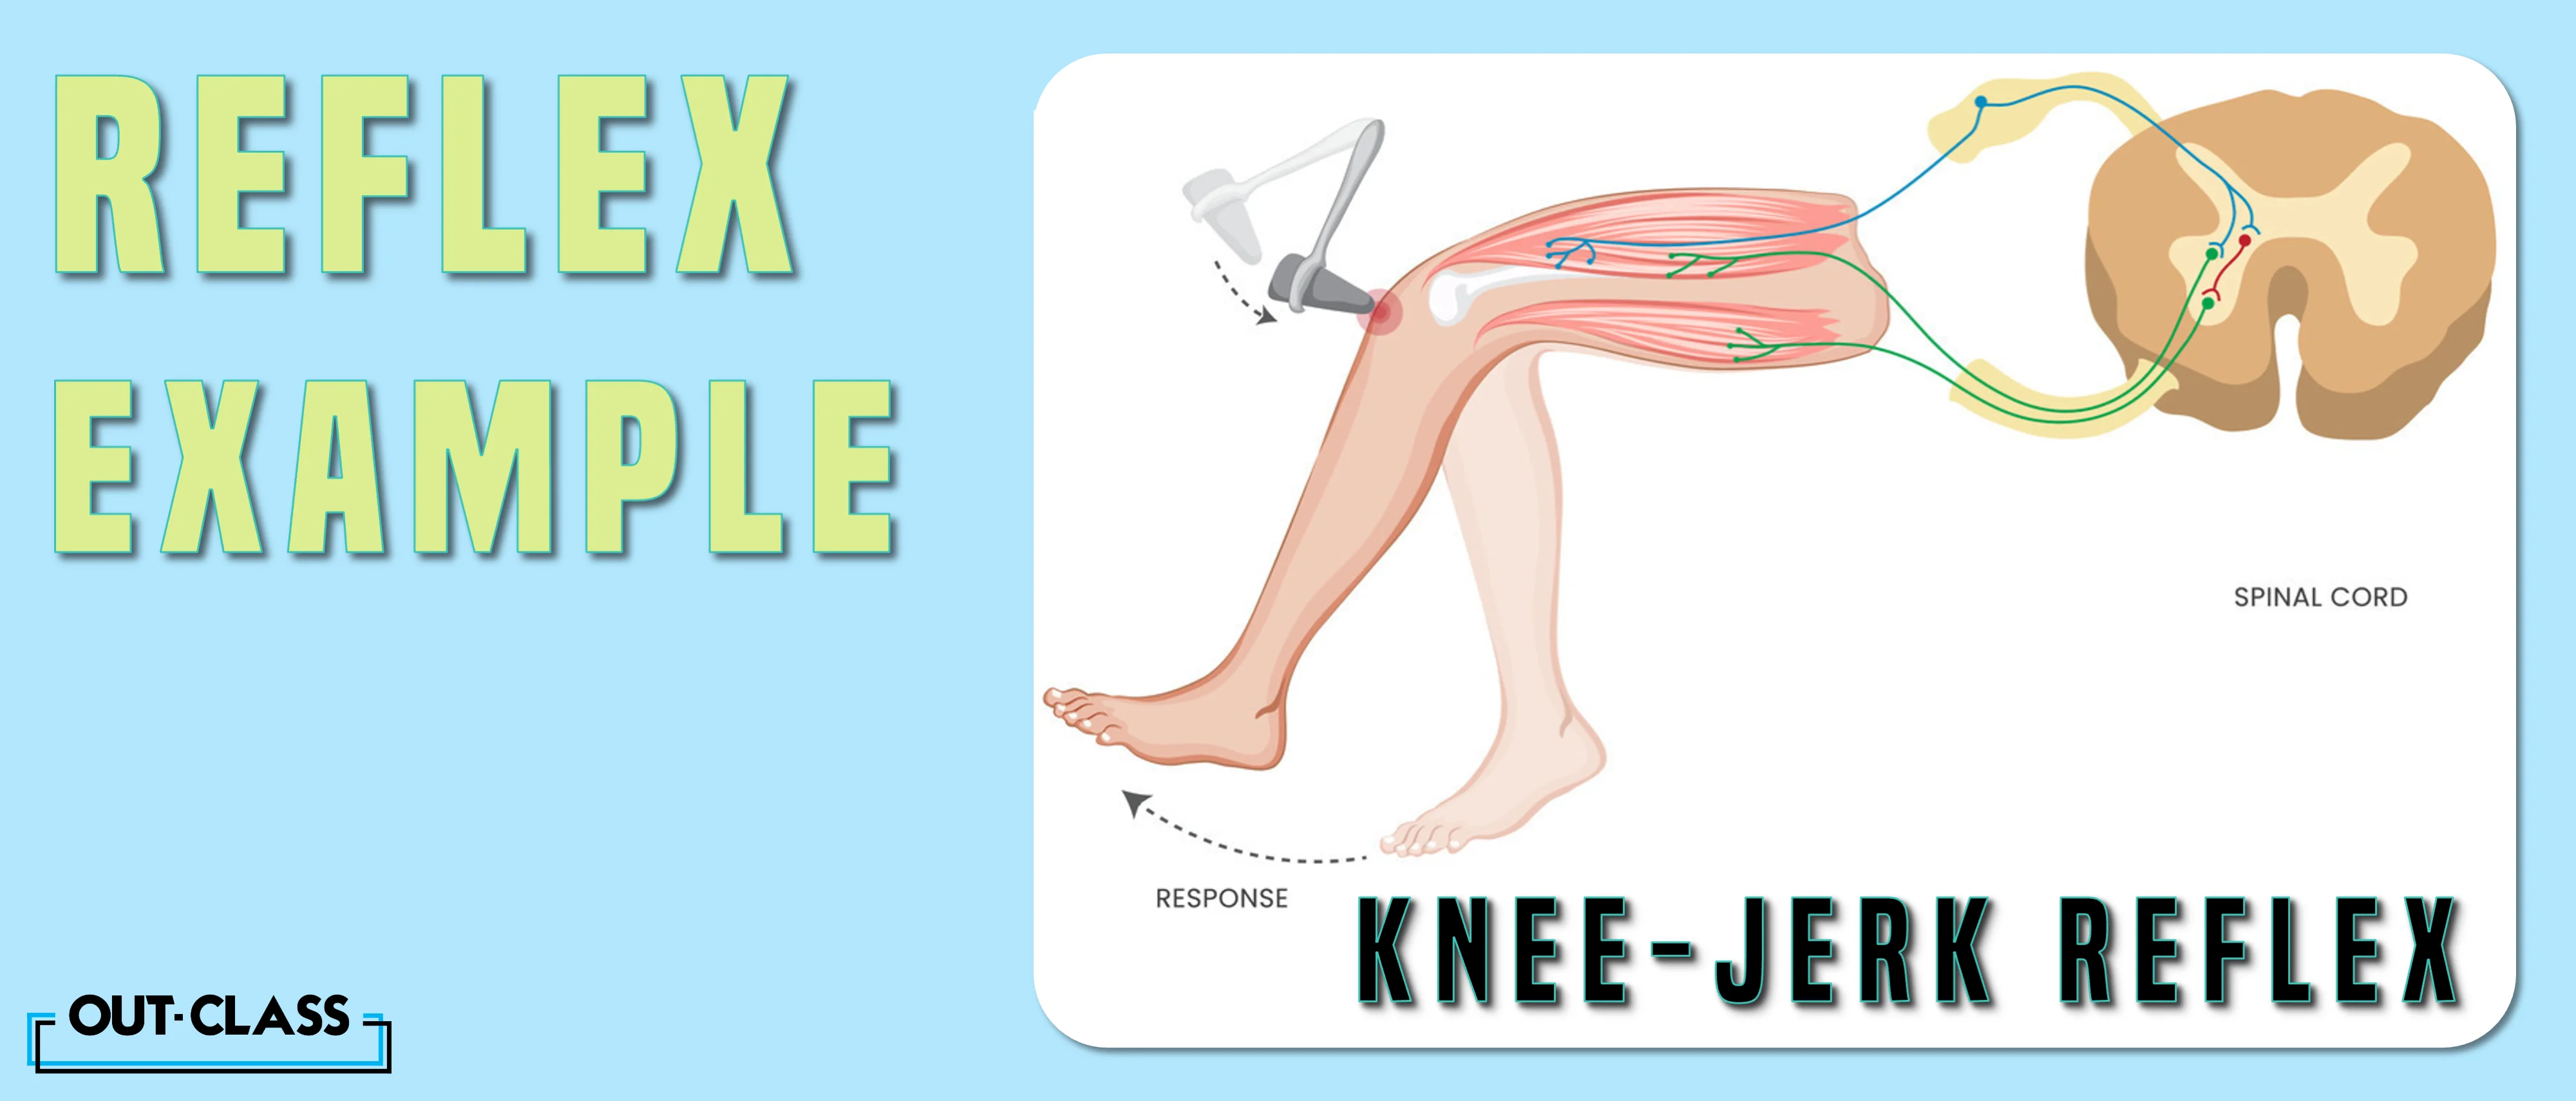 An example of reflex action is the knee-jerk reflex. The Knee-jerk reflex is the tapping of the tendon right below the knee that causes the leg to spring up.